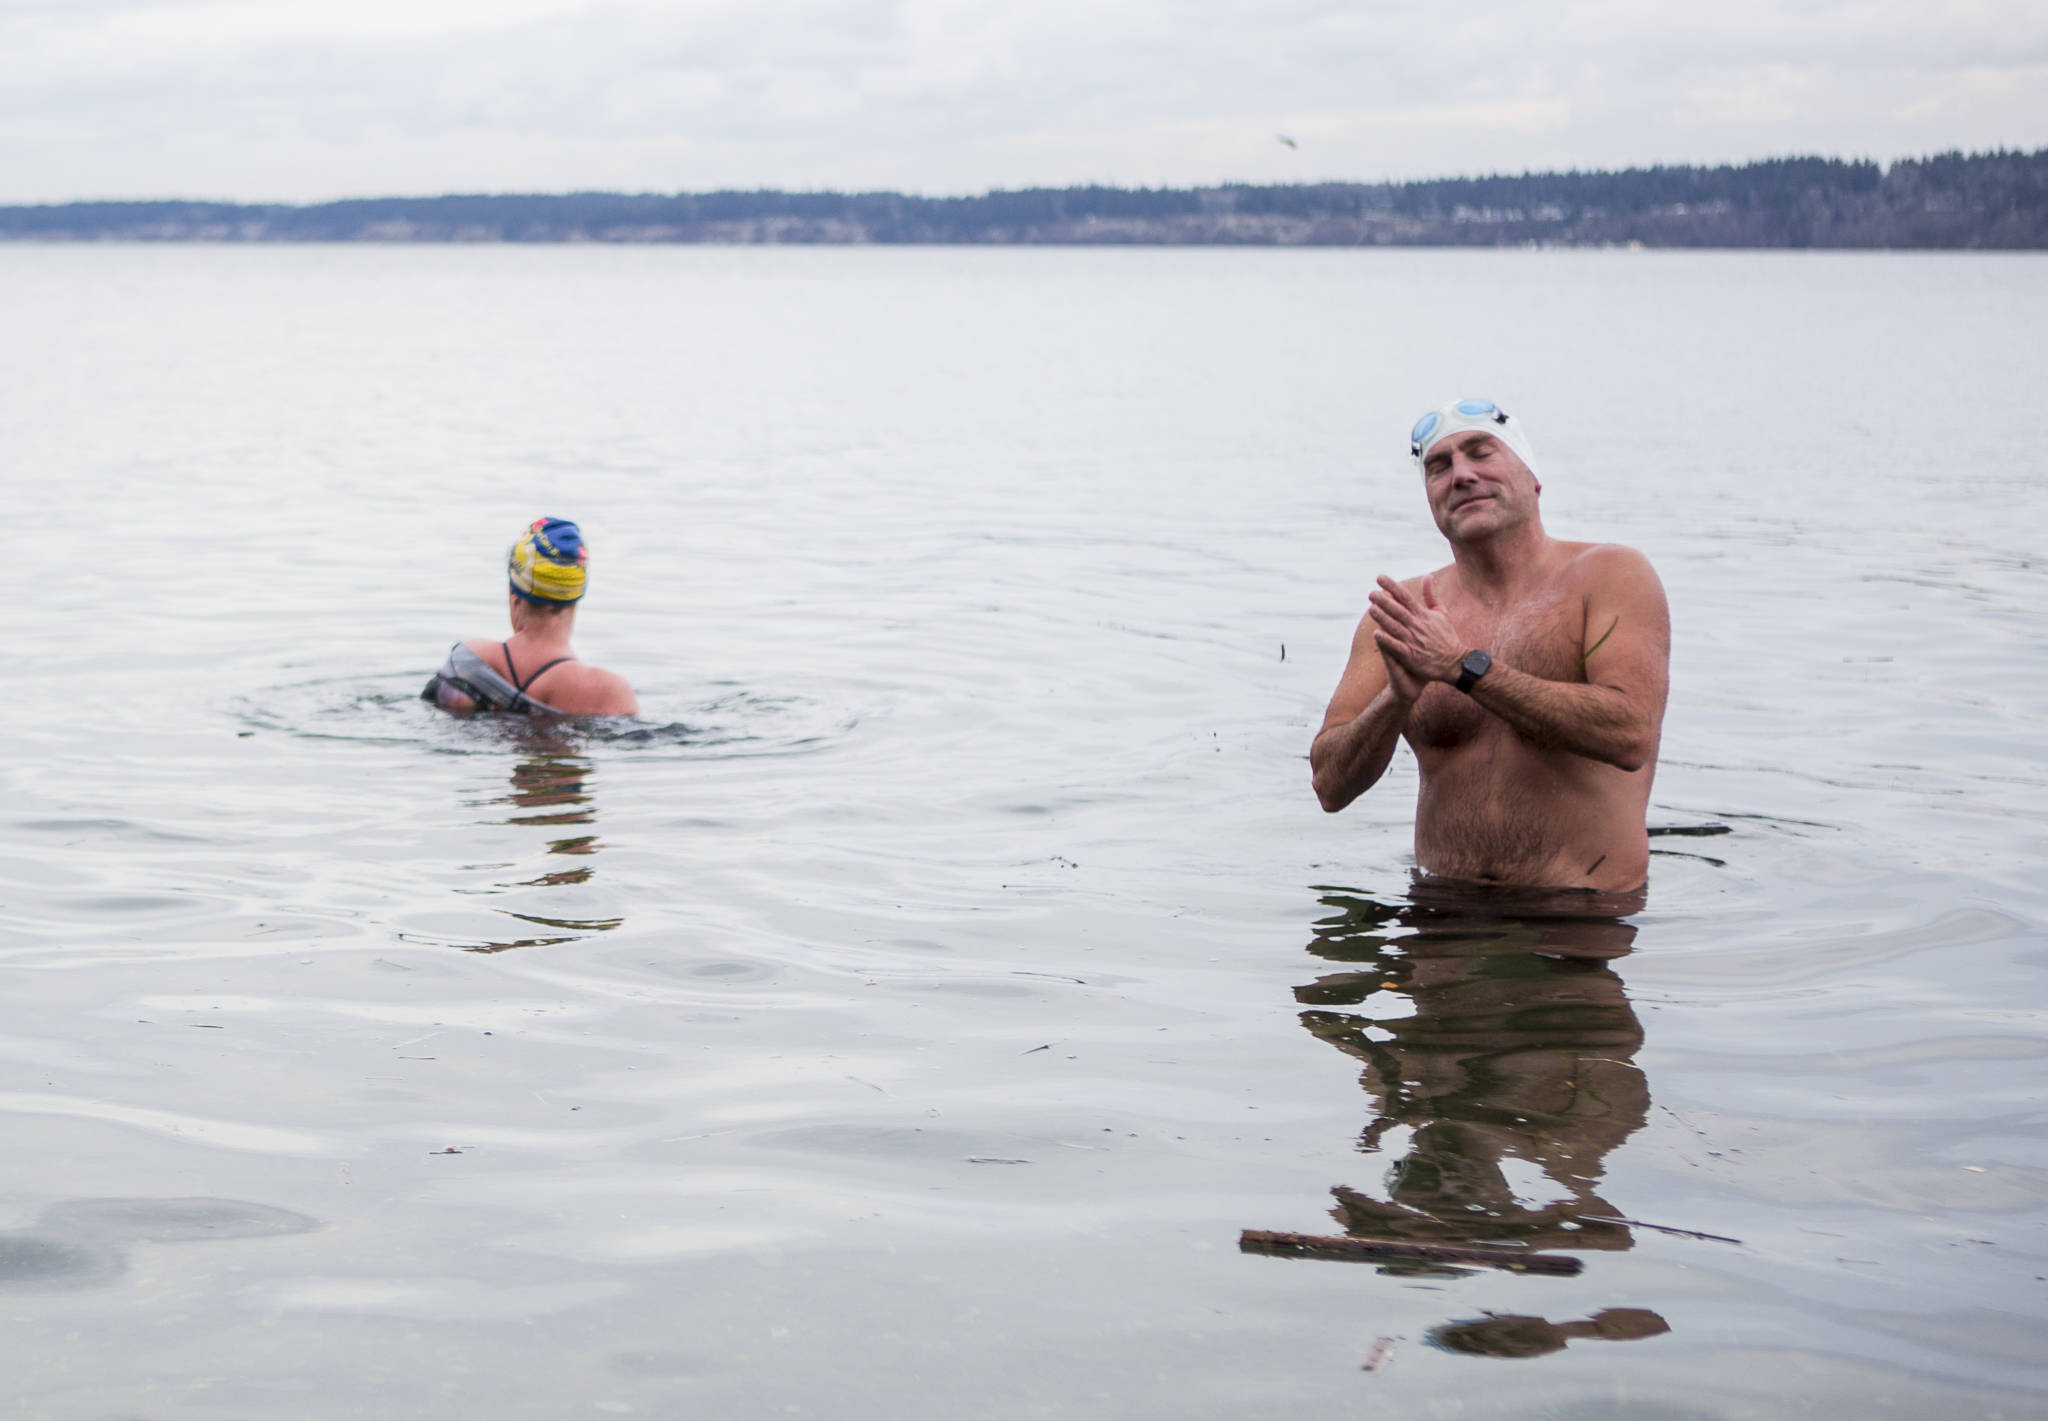 Joe Hempel (right), and Kristin Galbreaith finish their 35-minute, one-mile swim from Seawall Park in Langley. (Olivia Vanni / The Herald)